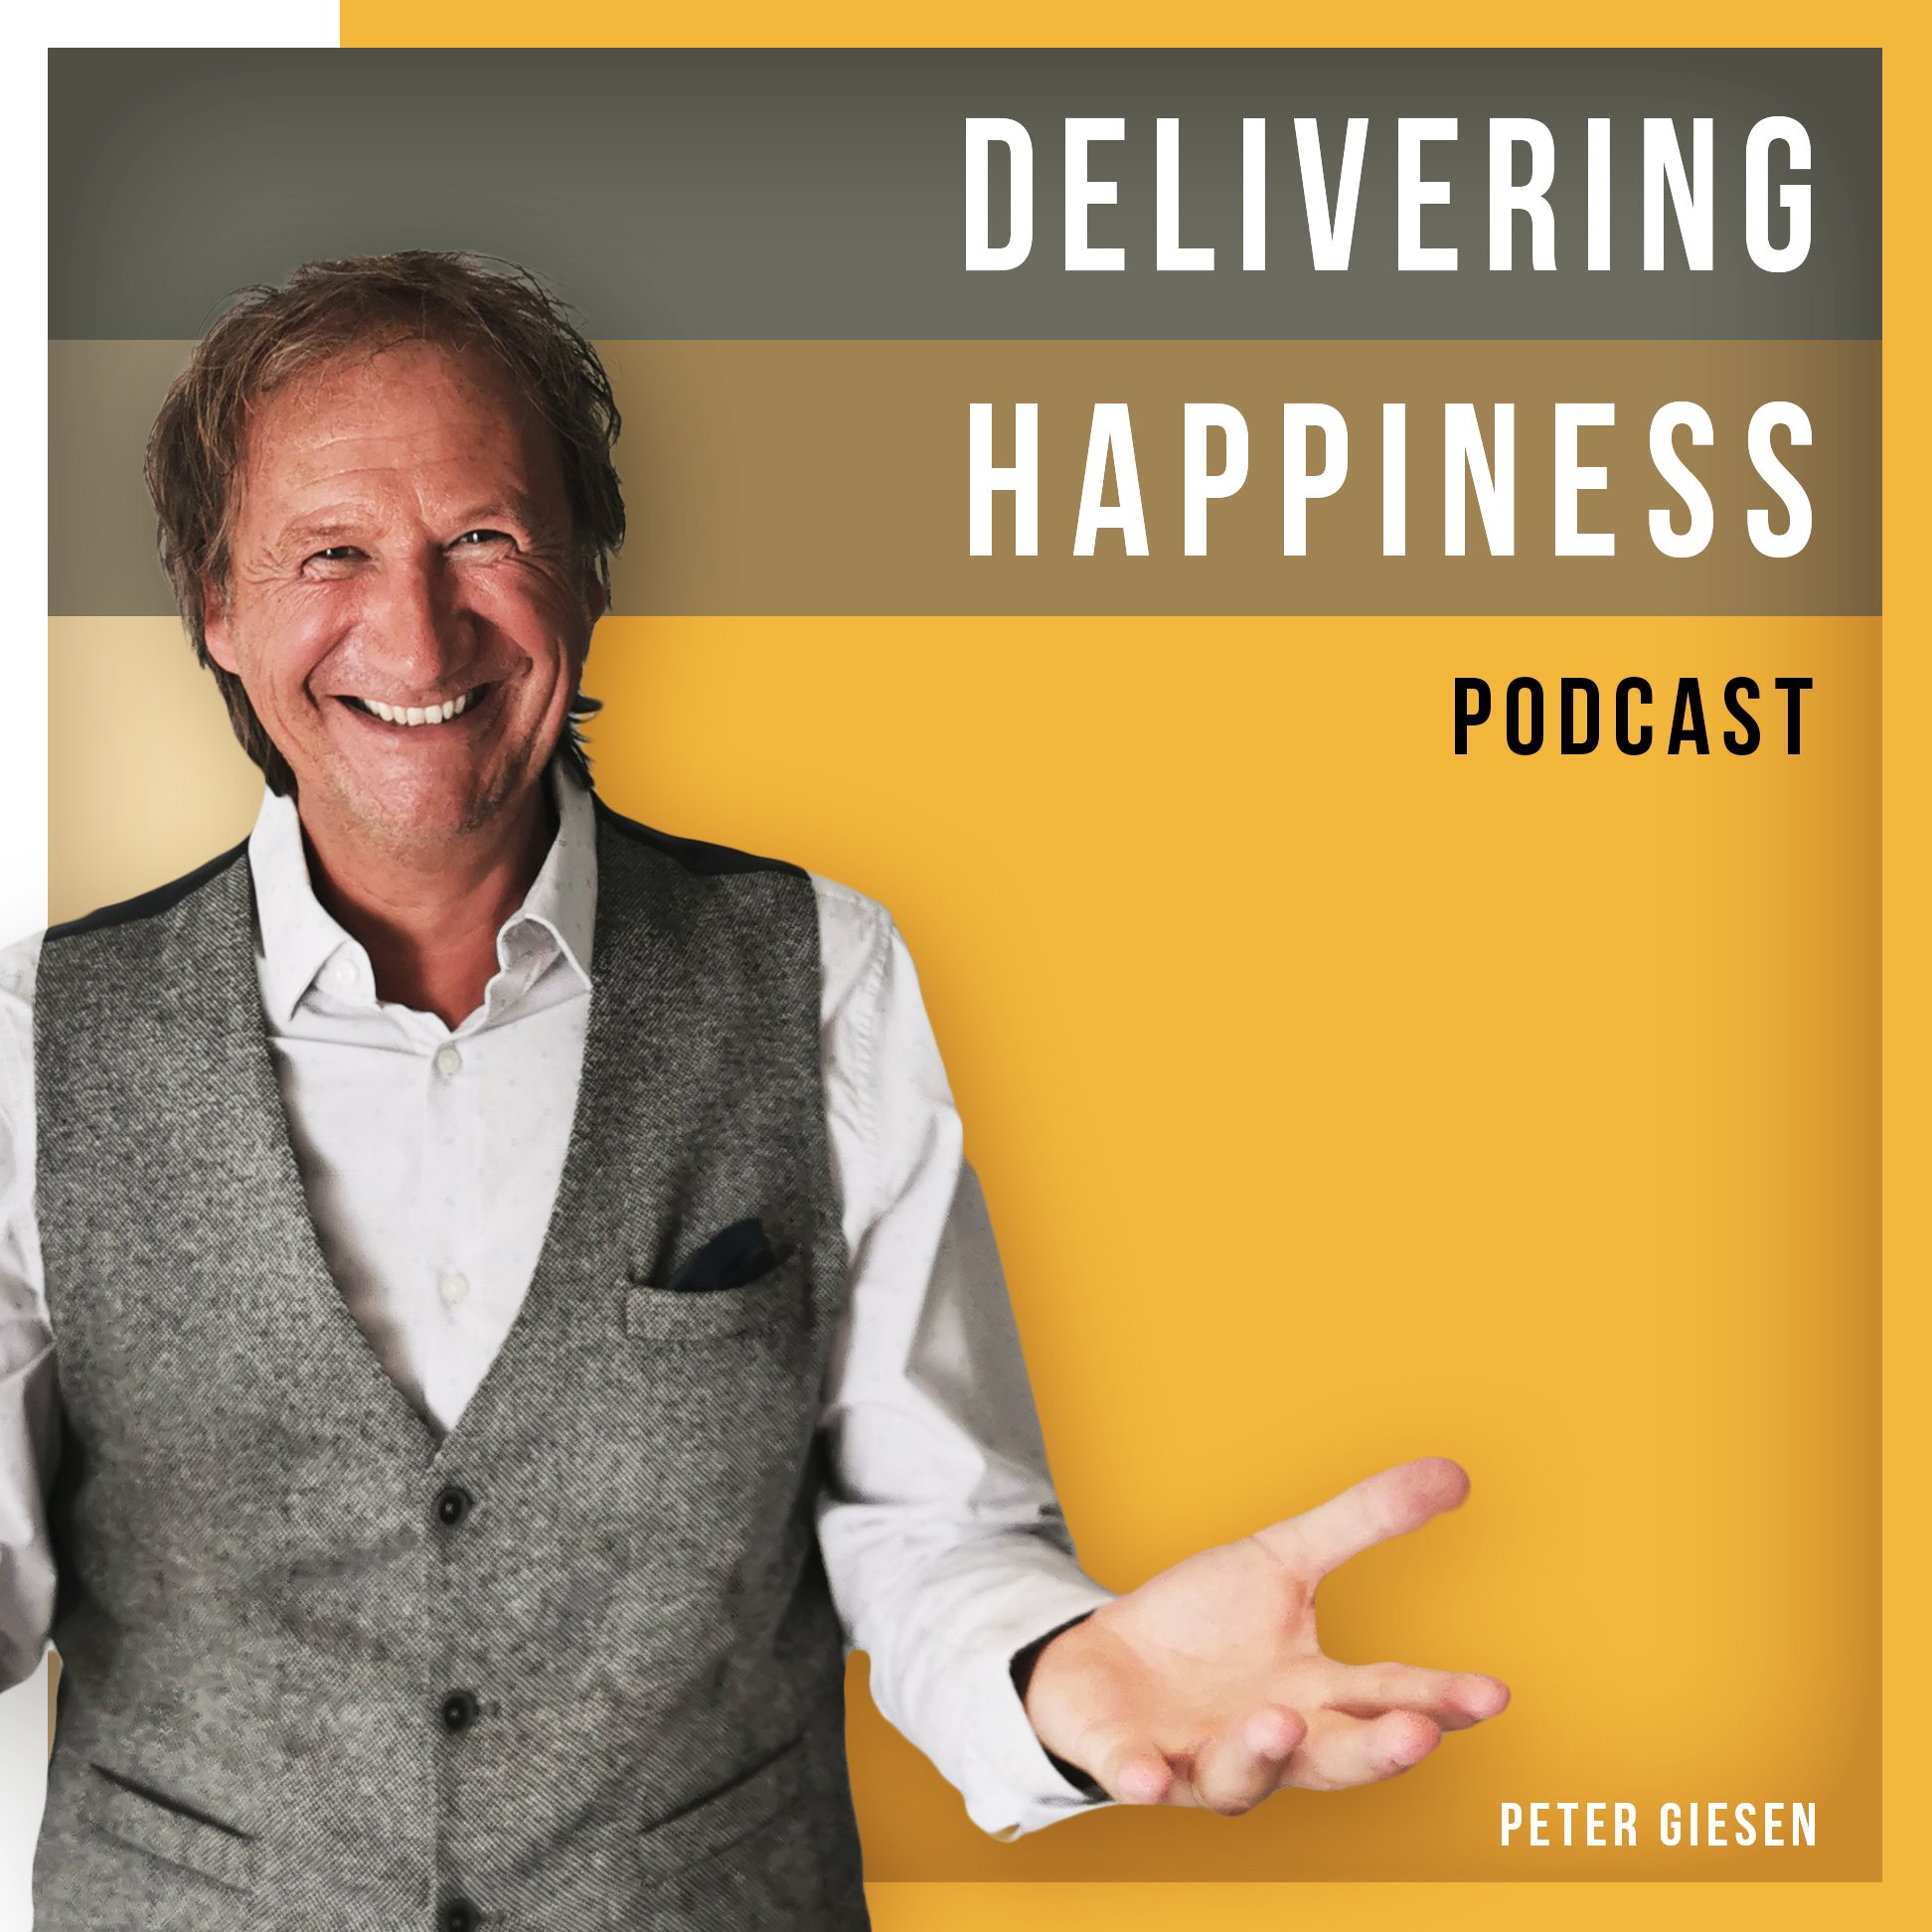 Peter　Listener　Delivering　Happiness　Numbers,　von　Contacts,　Similar　Podcasts　Giesen